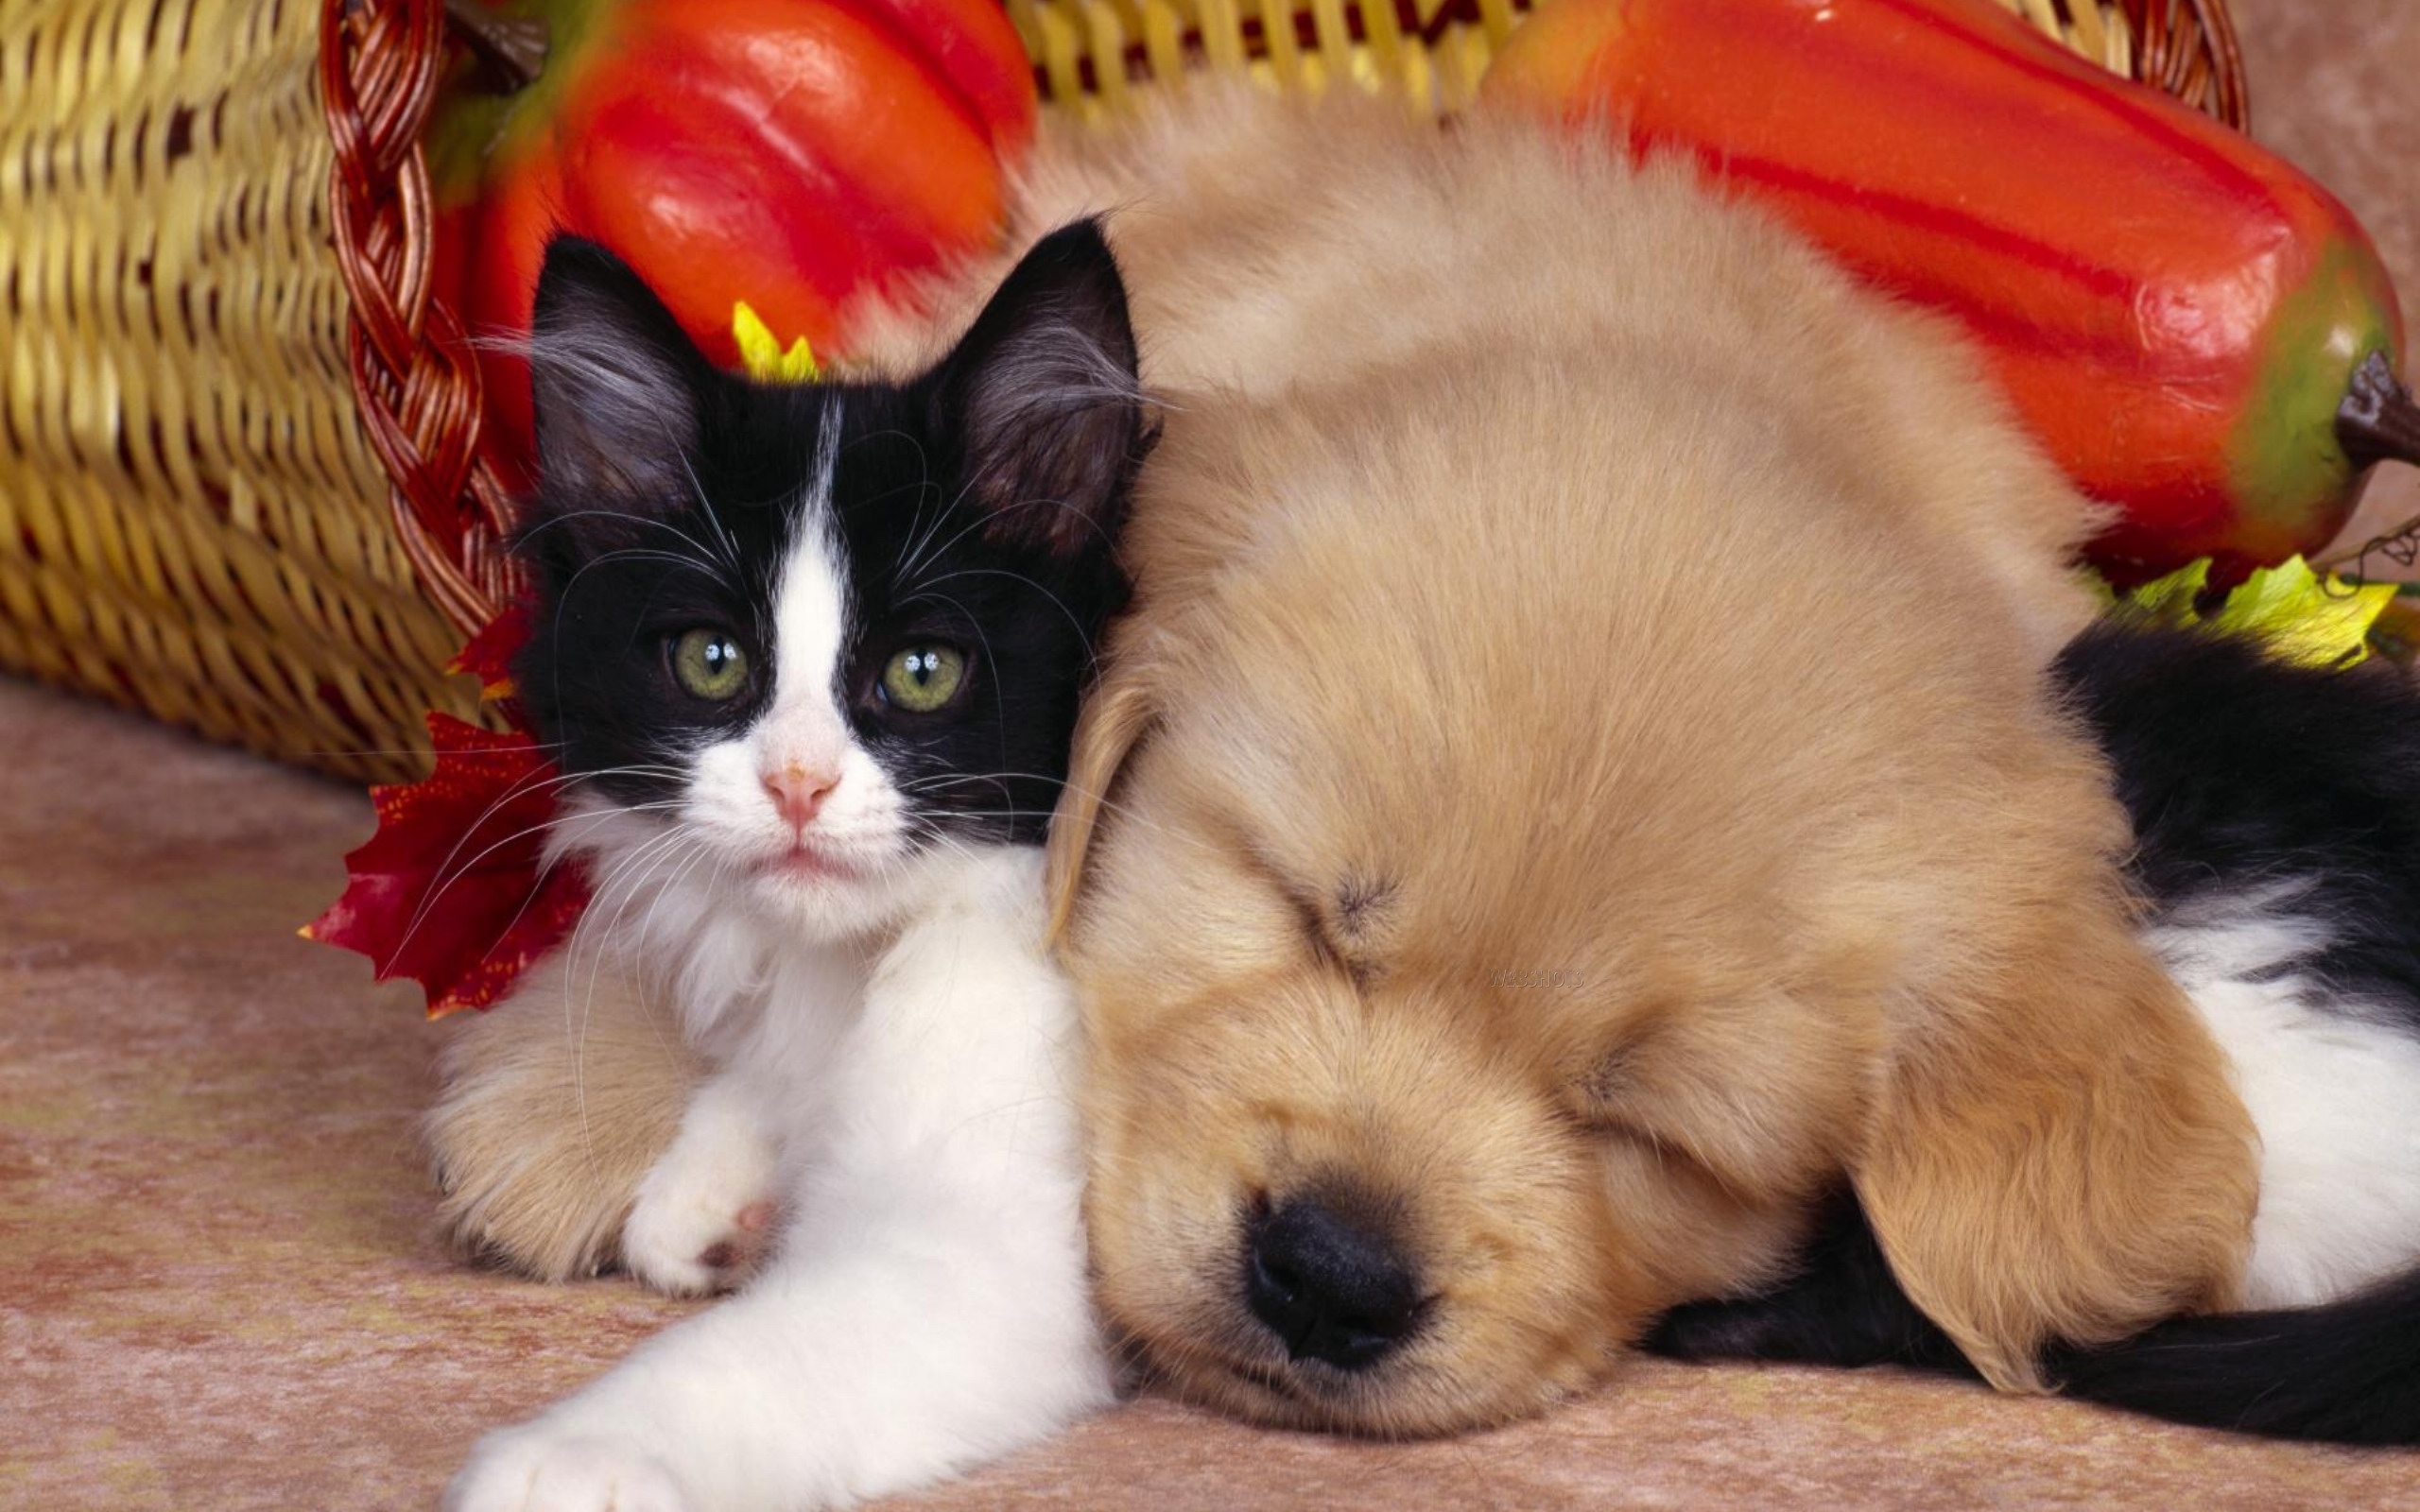 Download Link of Cute Cat and Dog